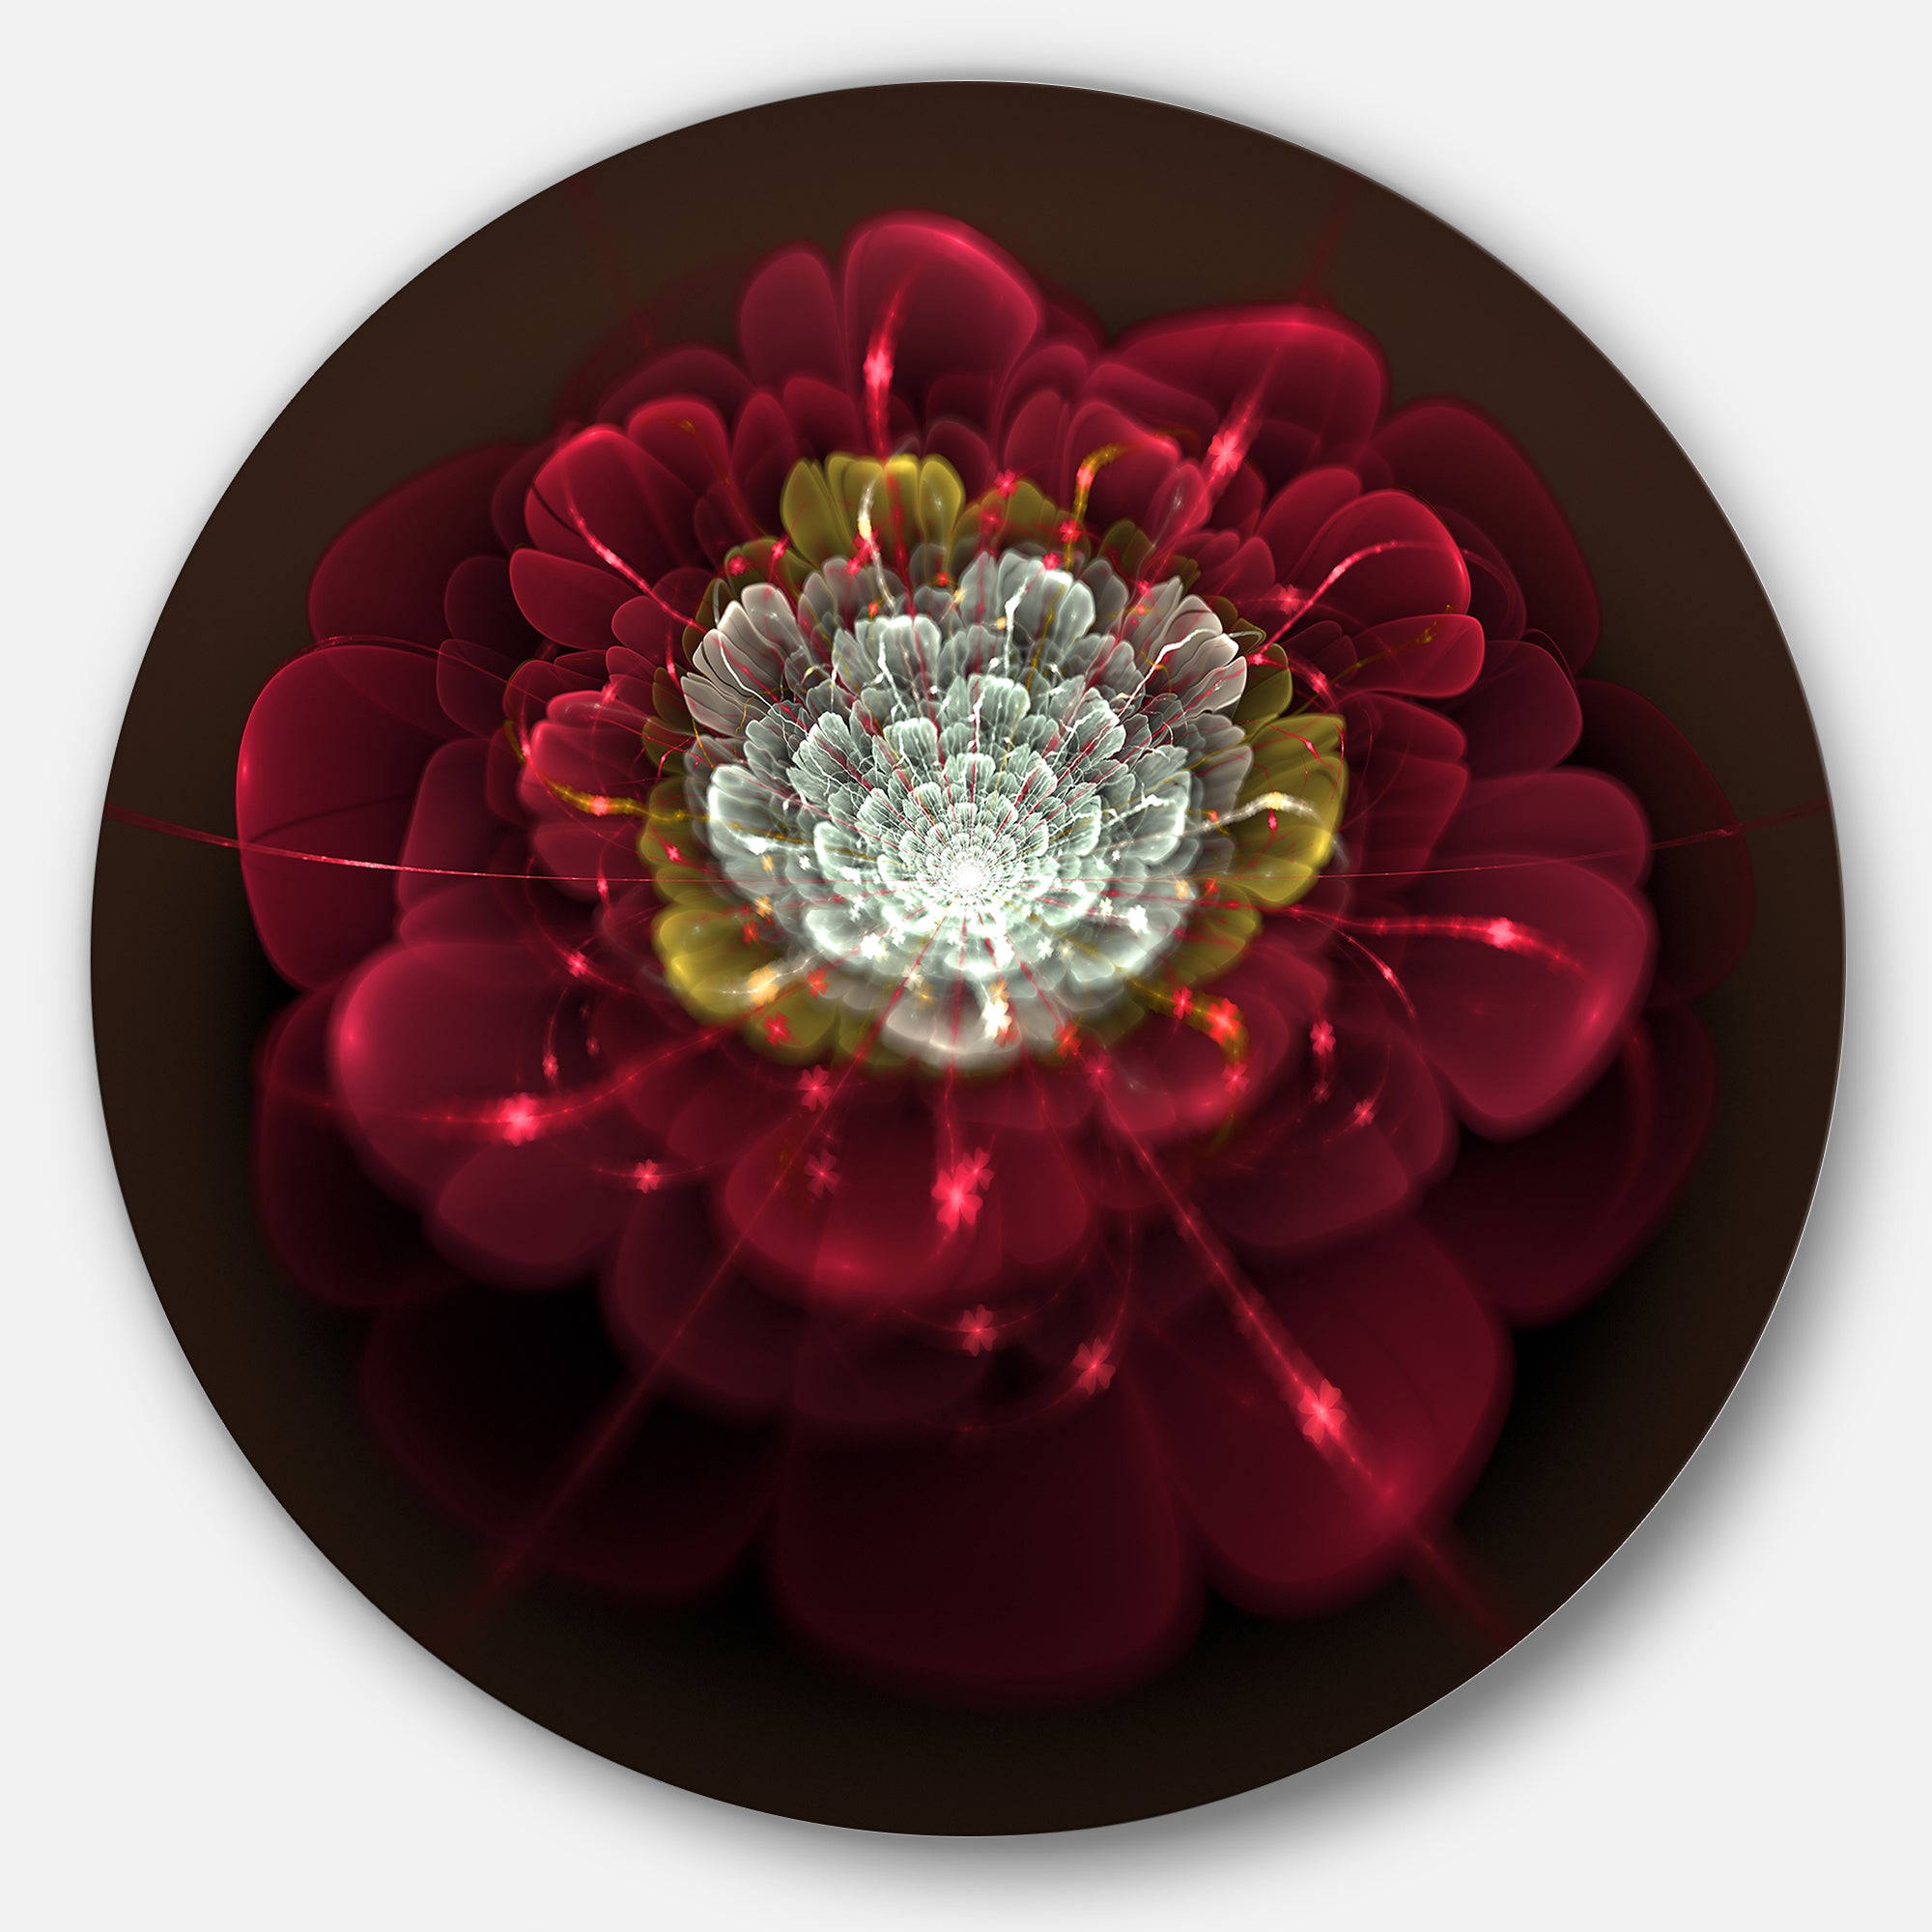 Red Fractal Flower with White' Floral Circle Metal Wall Art